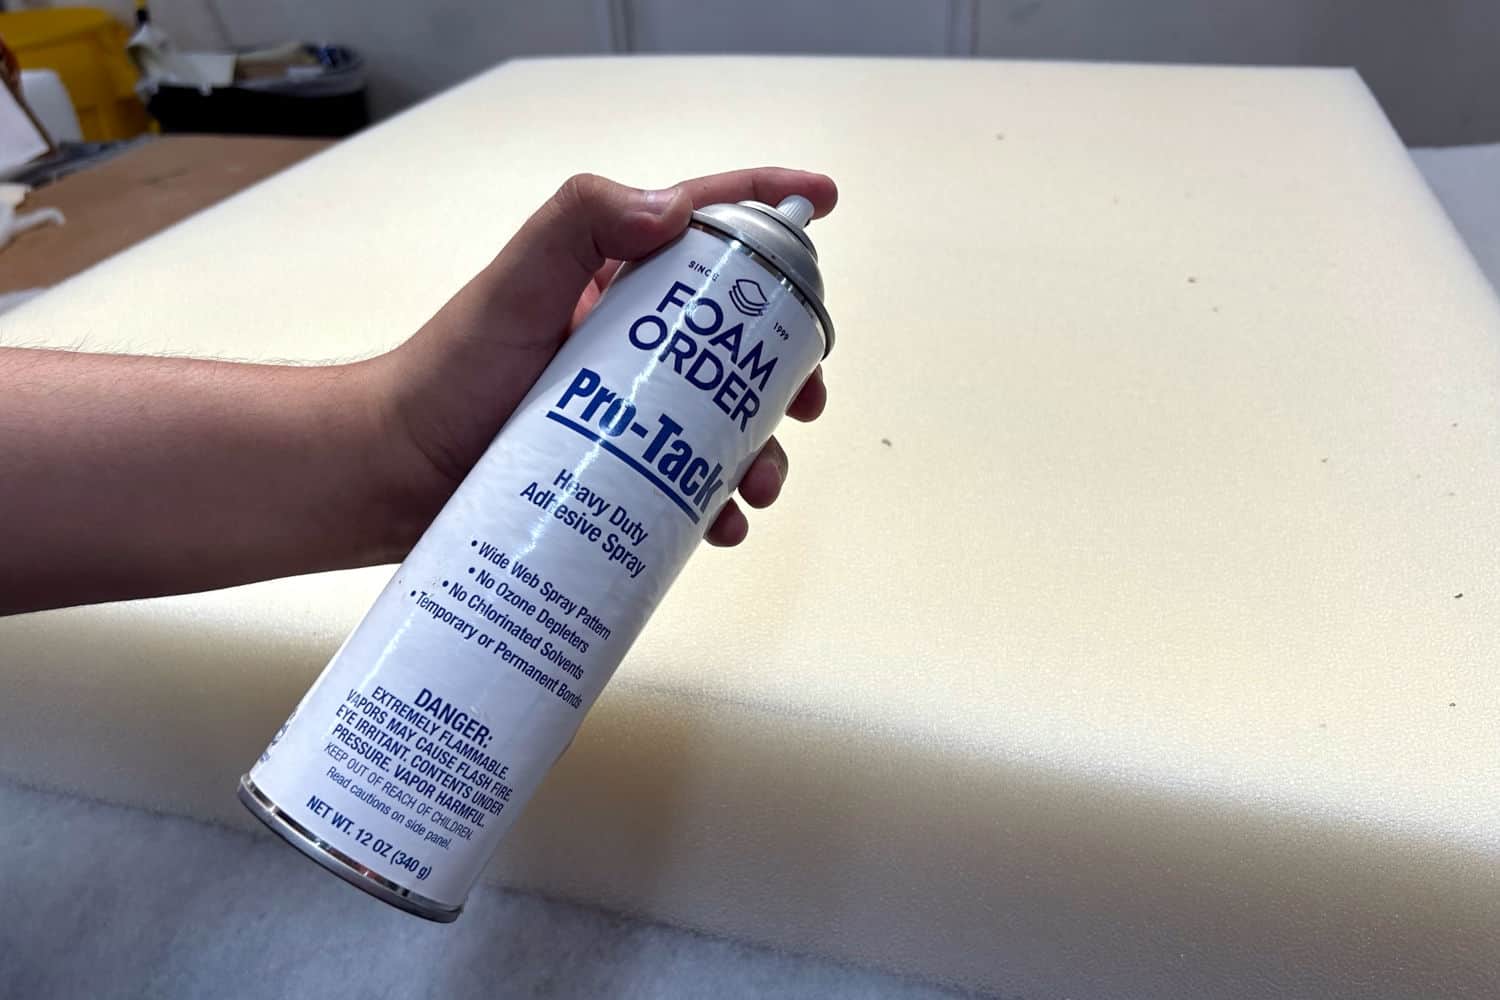 Can You Use Wood Glue for Foam?